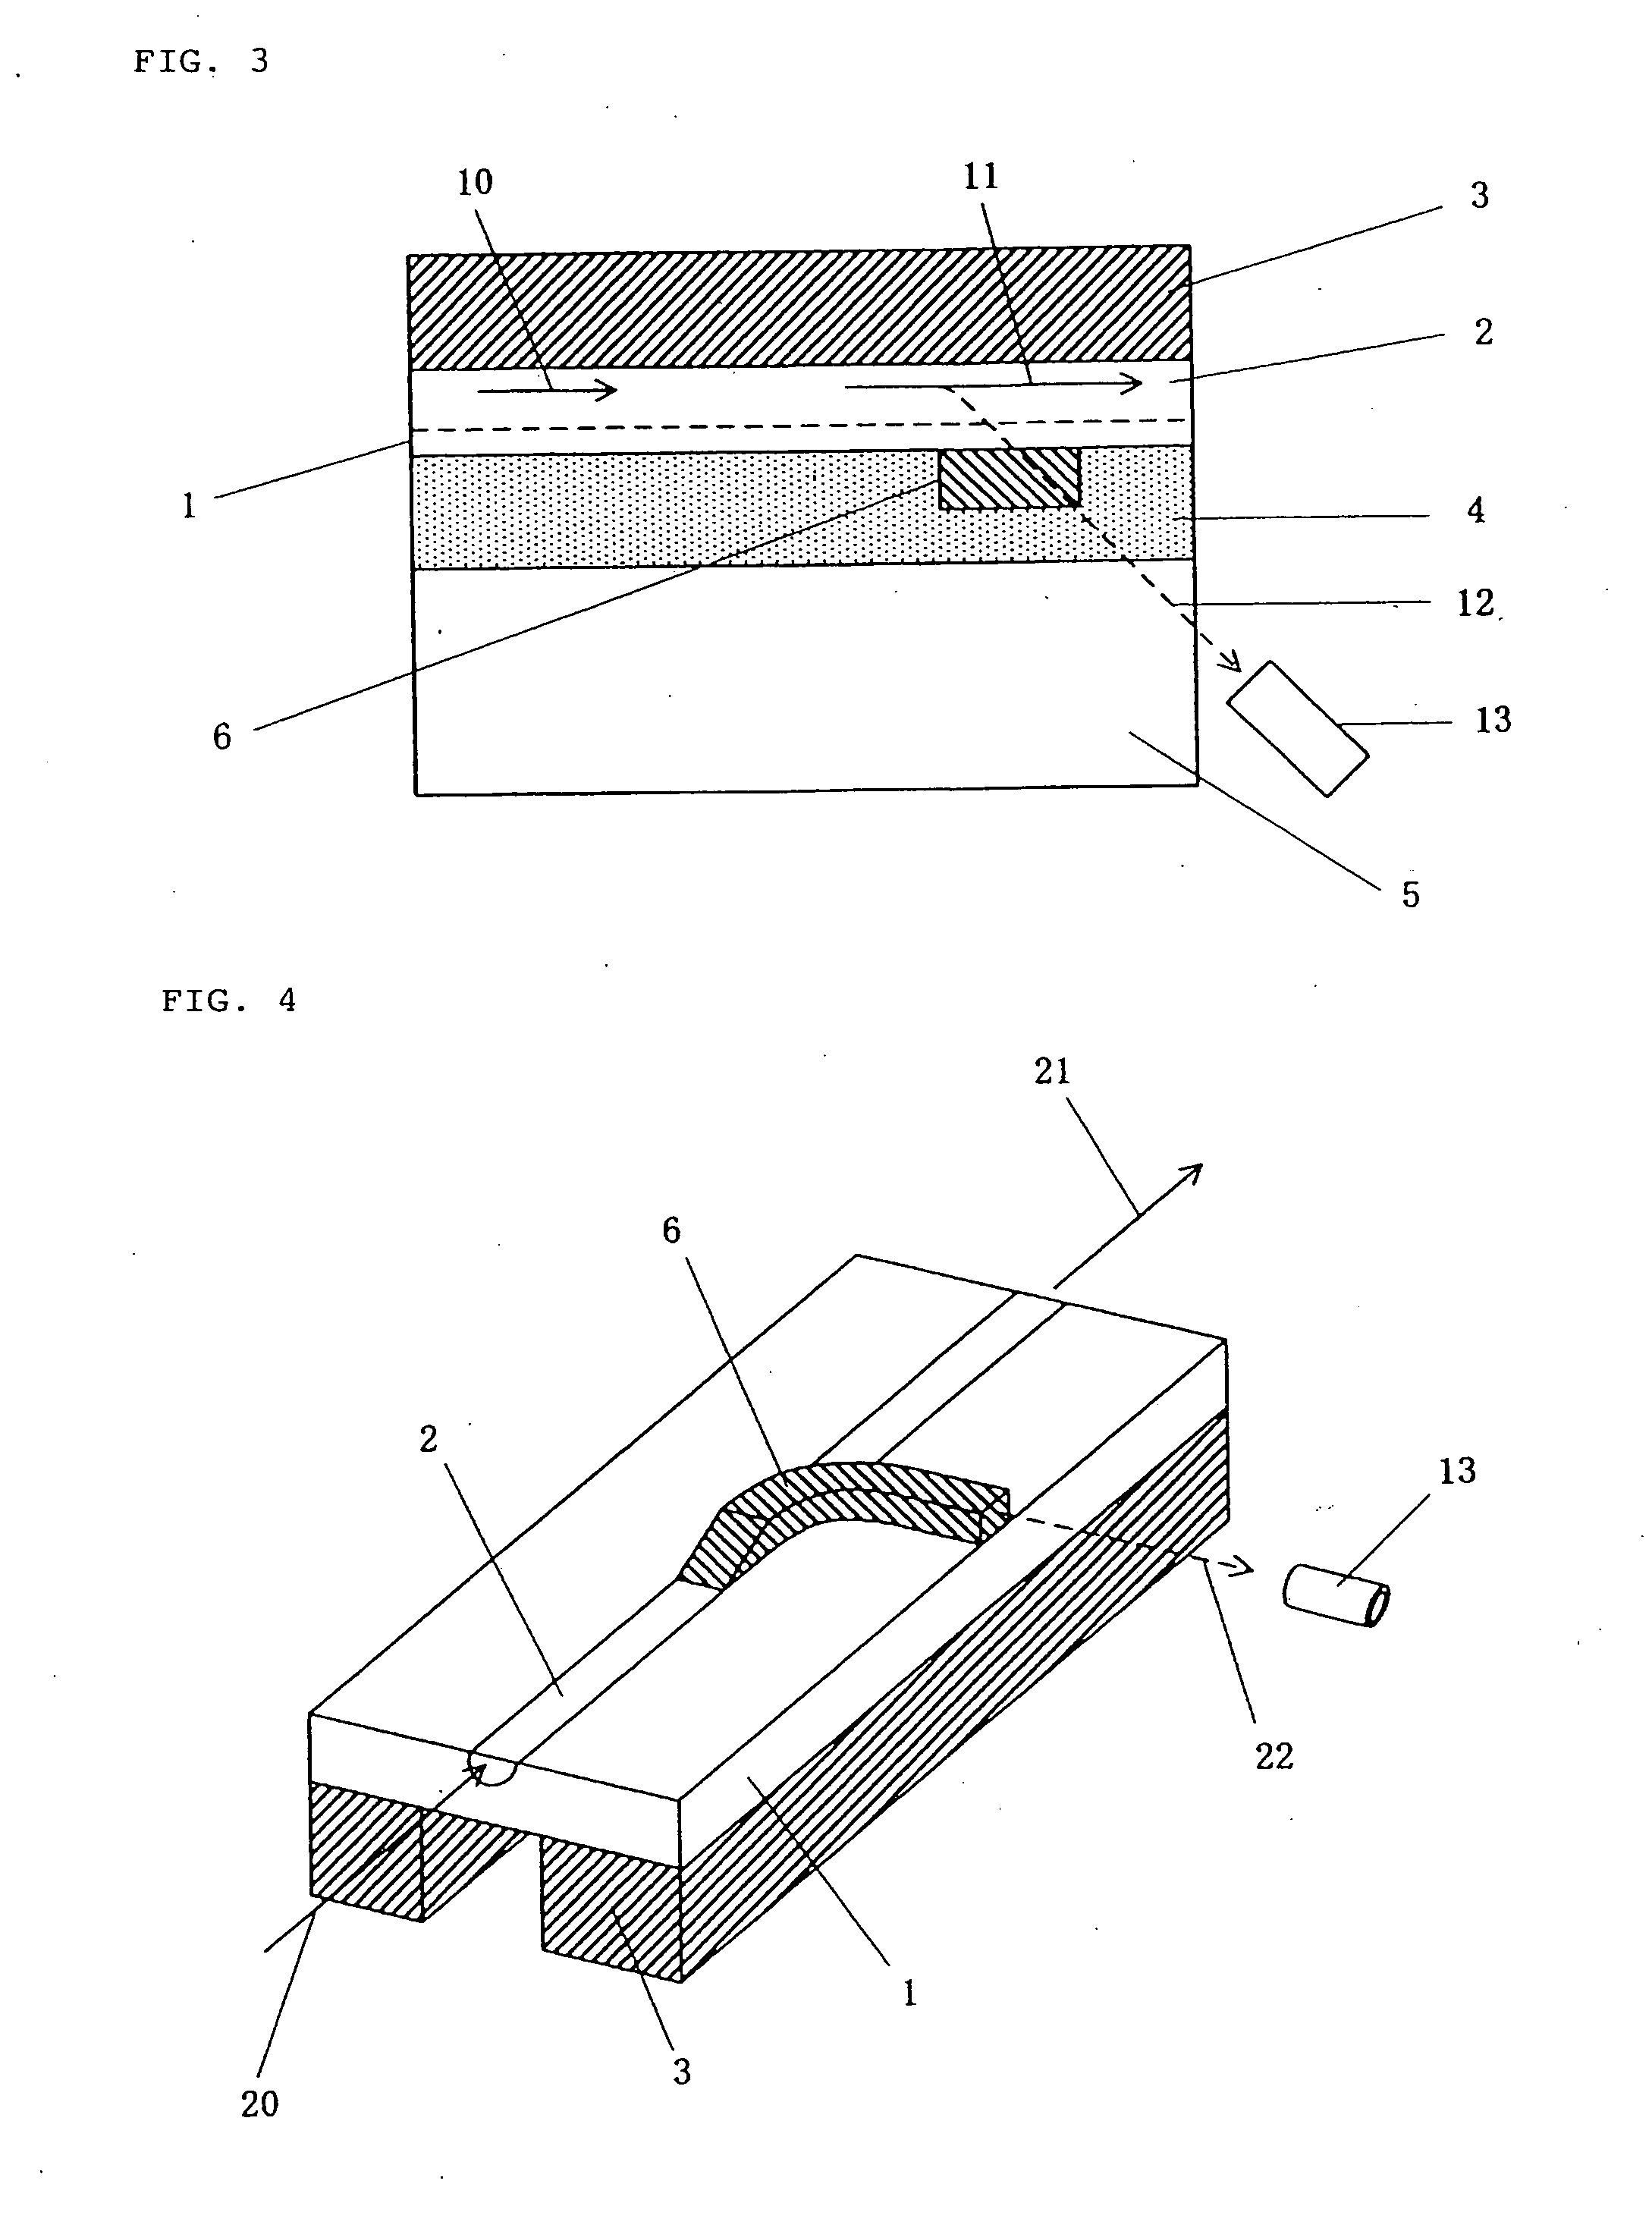 Optical waveguide device